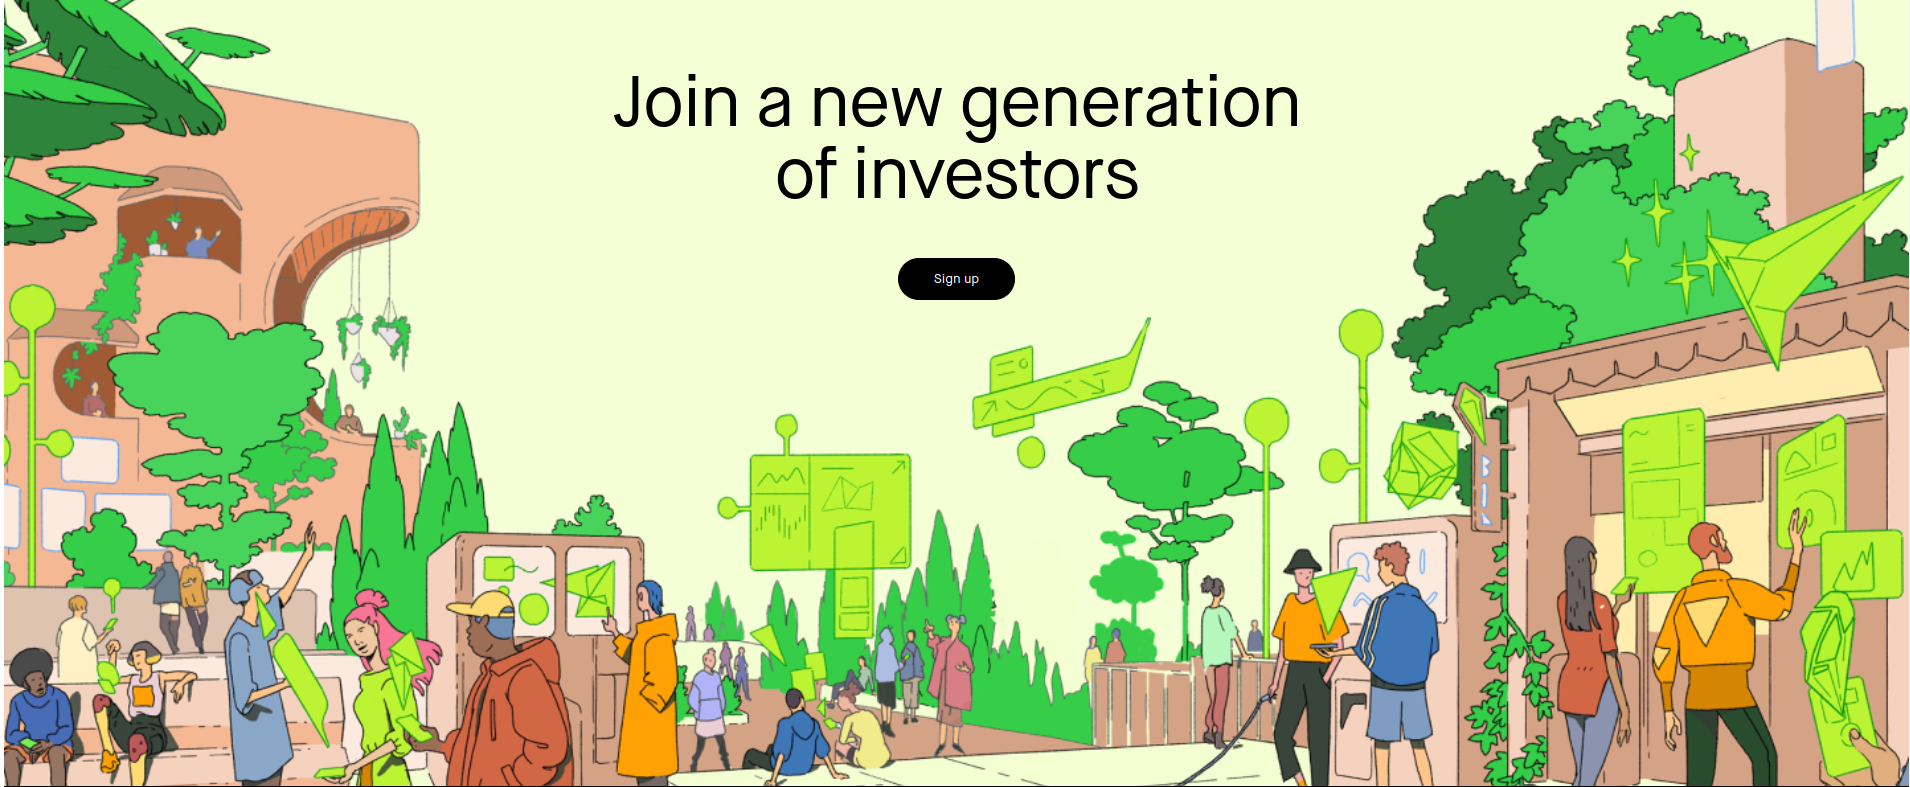 The comic style shows that the Robinhood fintech website is aimed at young people